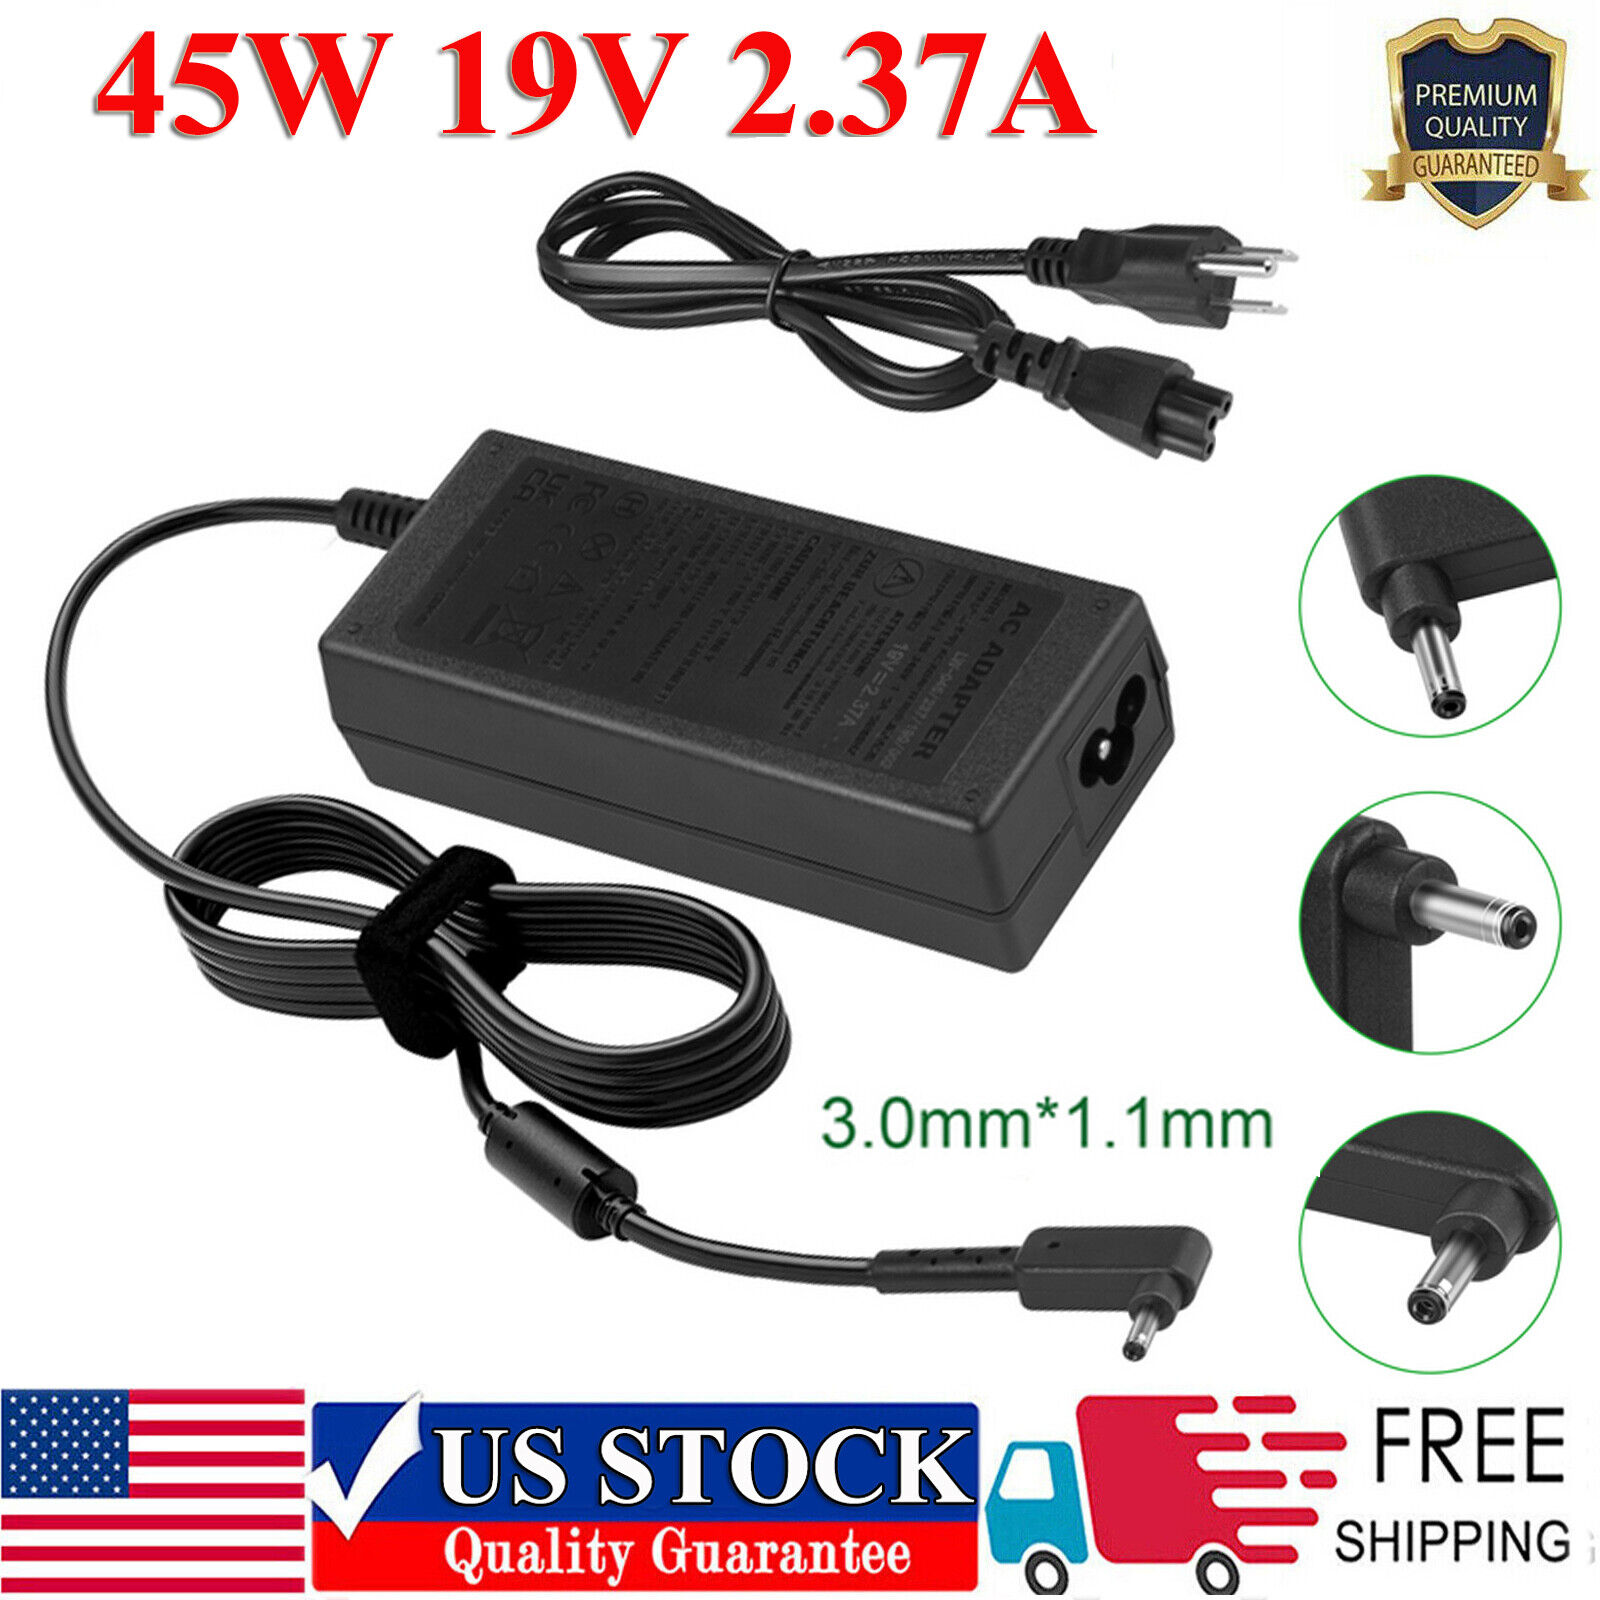 AC Adapter Power Charger For Asus Chromebook C200 C200M 19V 2.37A 45W Laptop